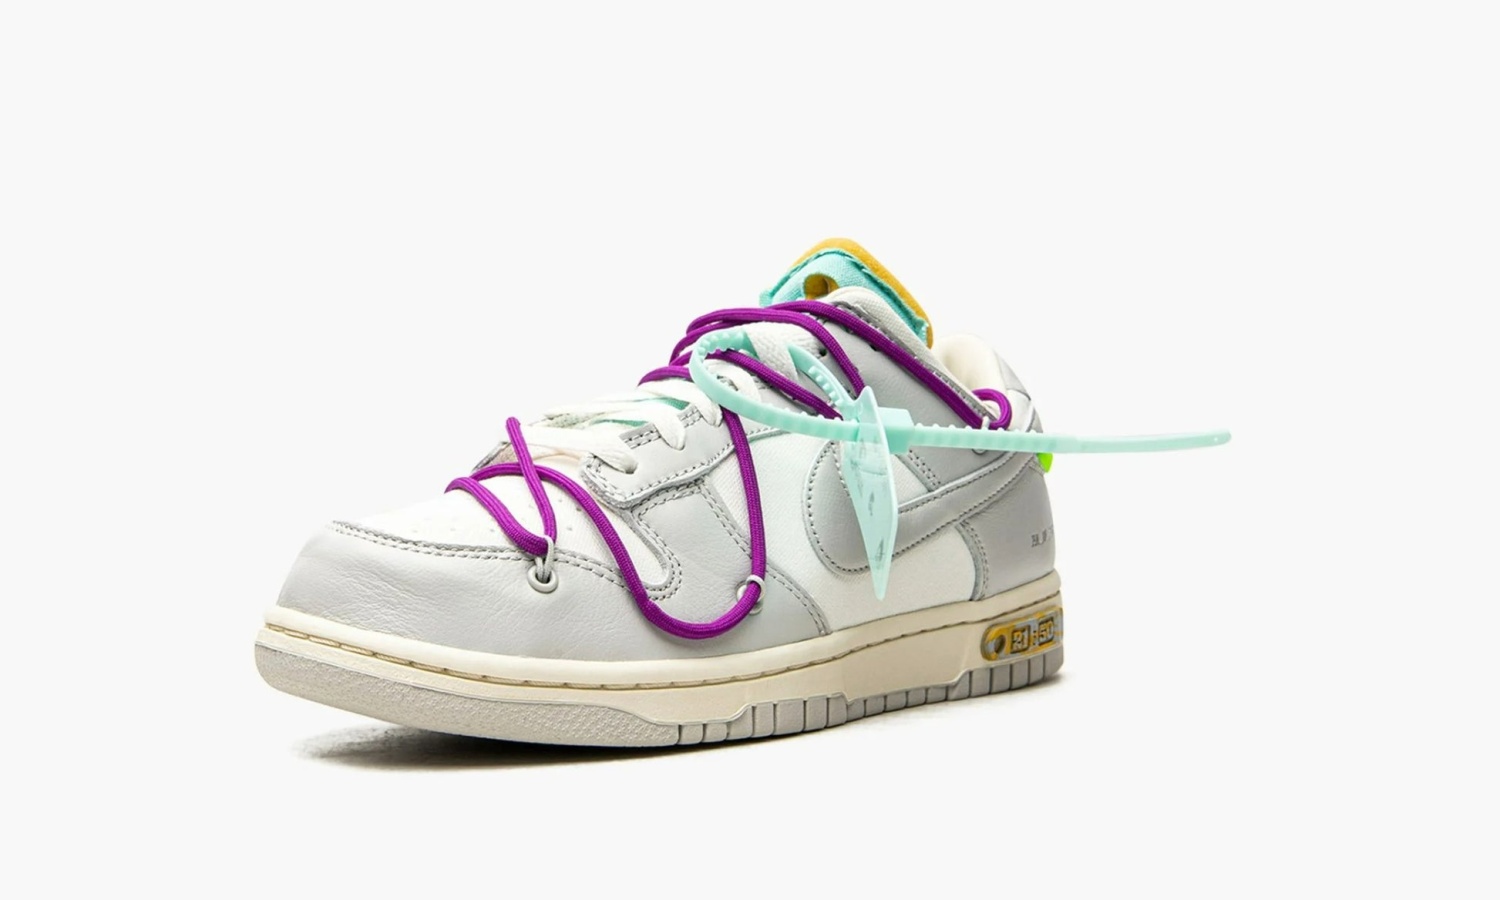 фото Dunk Low "Off-White - Lot 21" (Nike Dunk Low)-DM1602 100